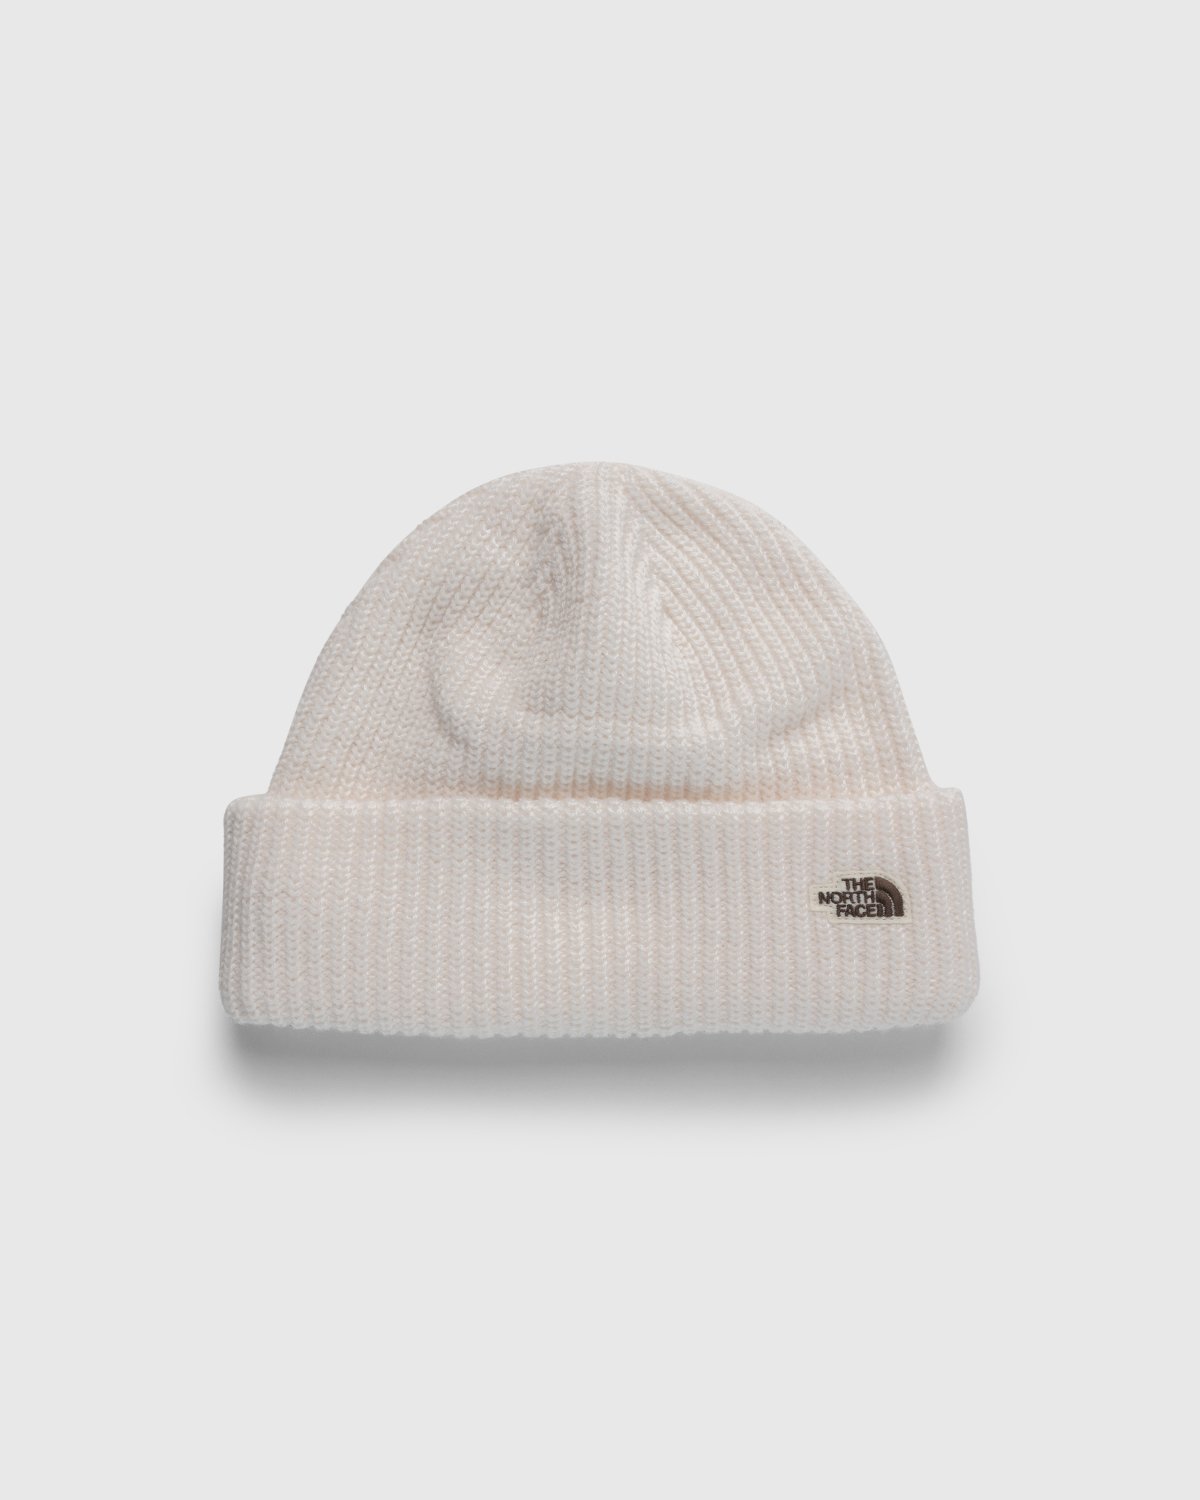 The North Face - Salty Dog Beanie Gardenia White - Accessories - White - Image 1